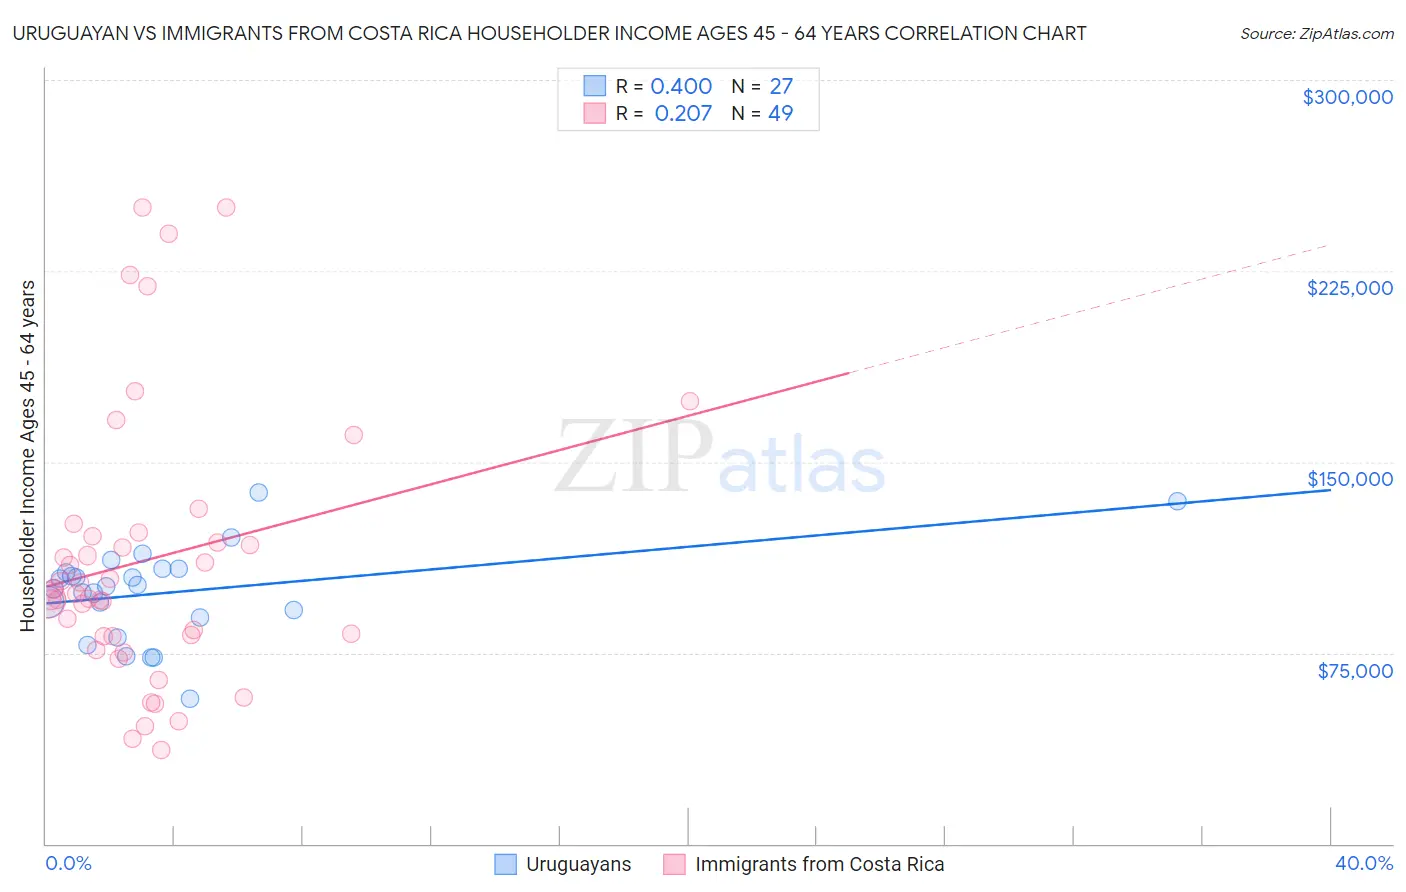 Uruguayan vs Immigrants from Costa Rica Householder Income Ages 45 - 64 years